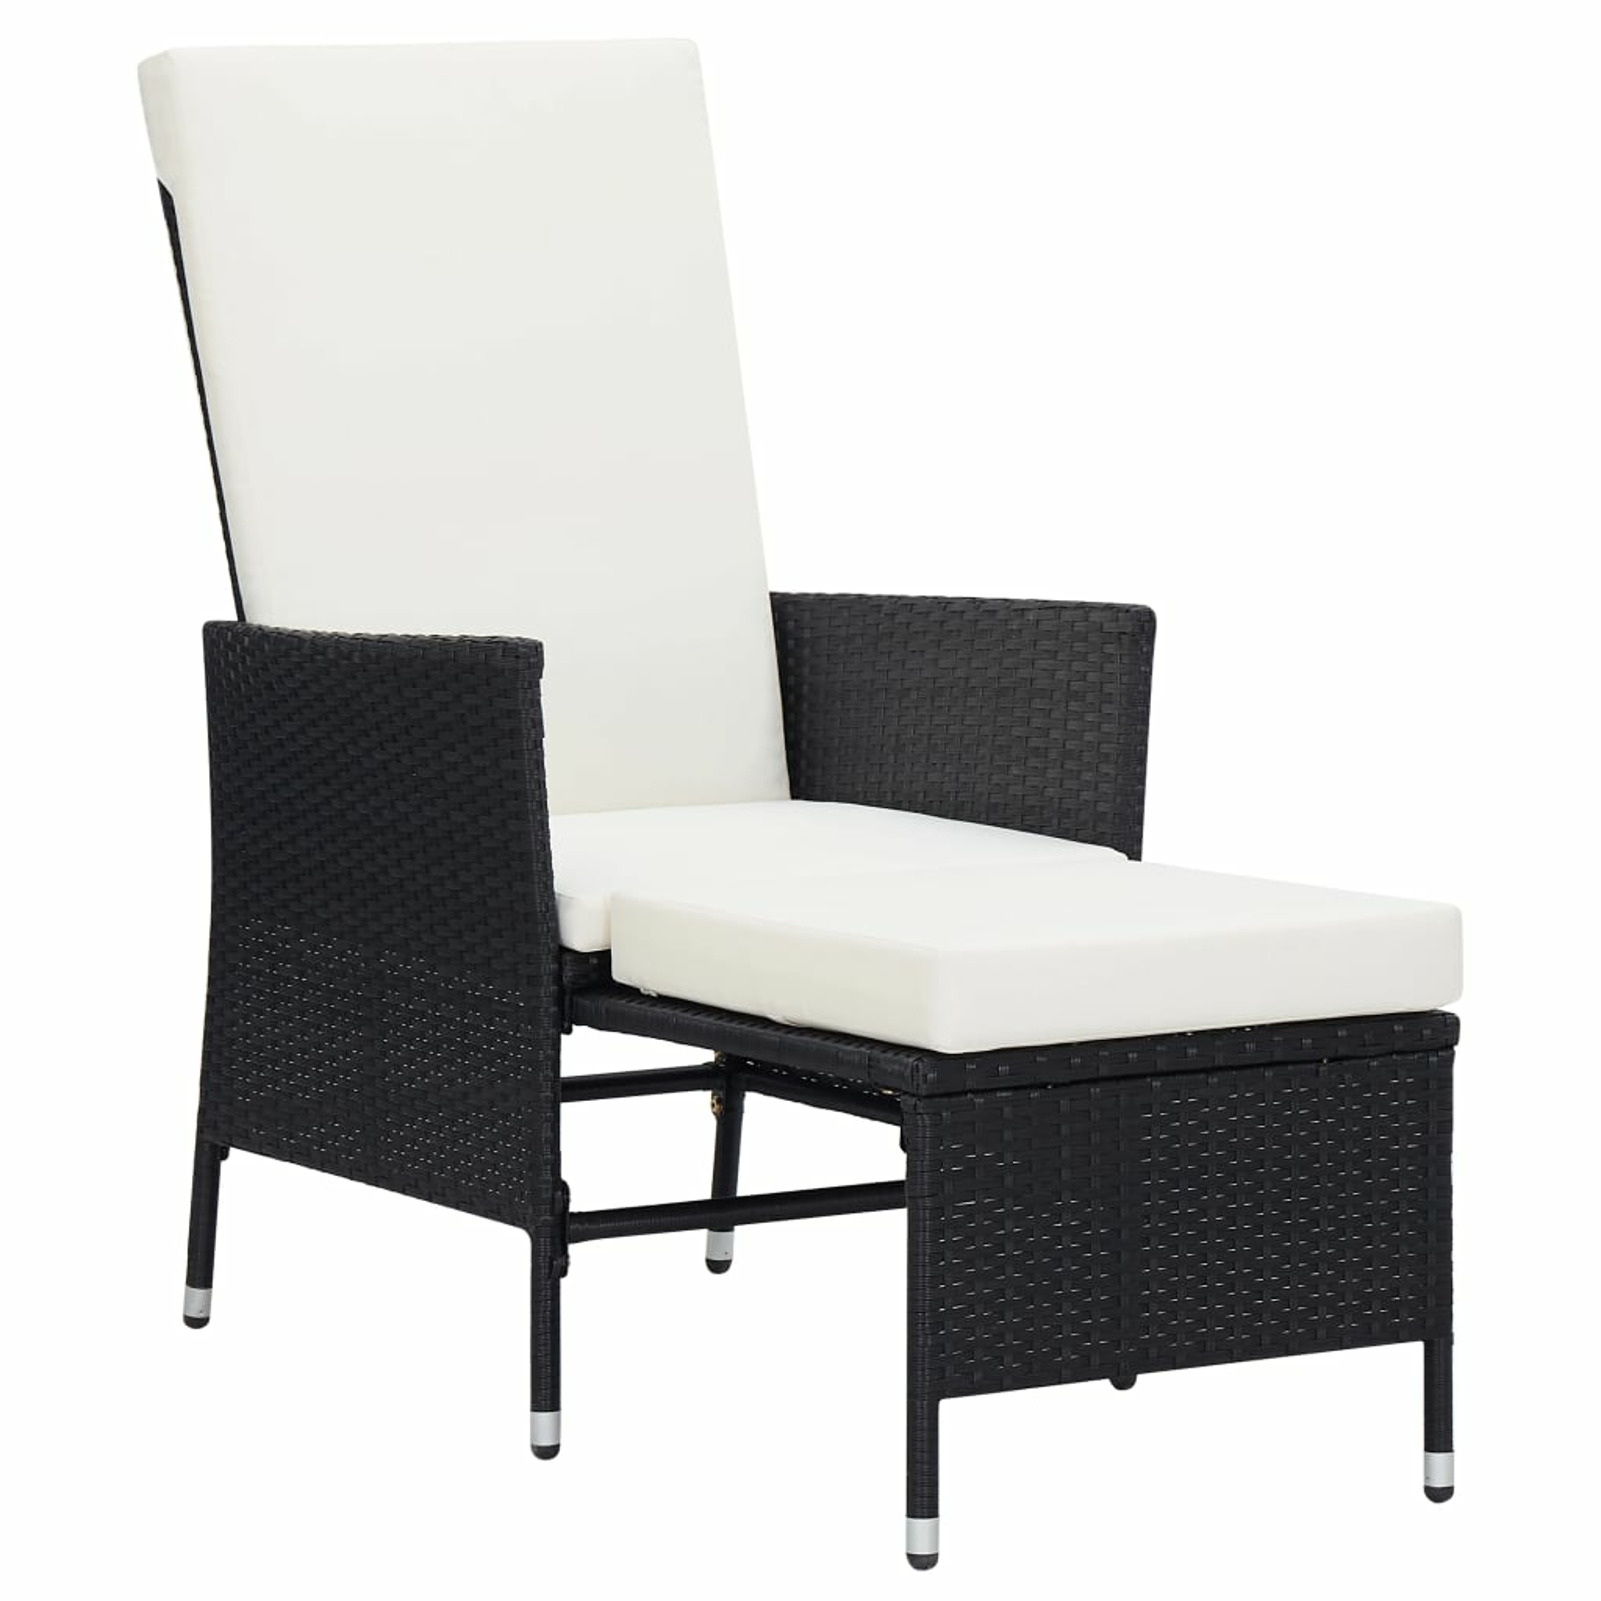 Reclining Patio Chair with Cushions Poly Rattan Black - image 2 of 7